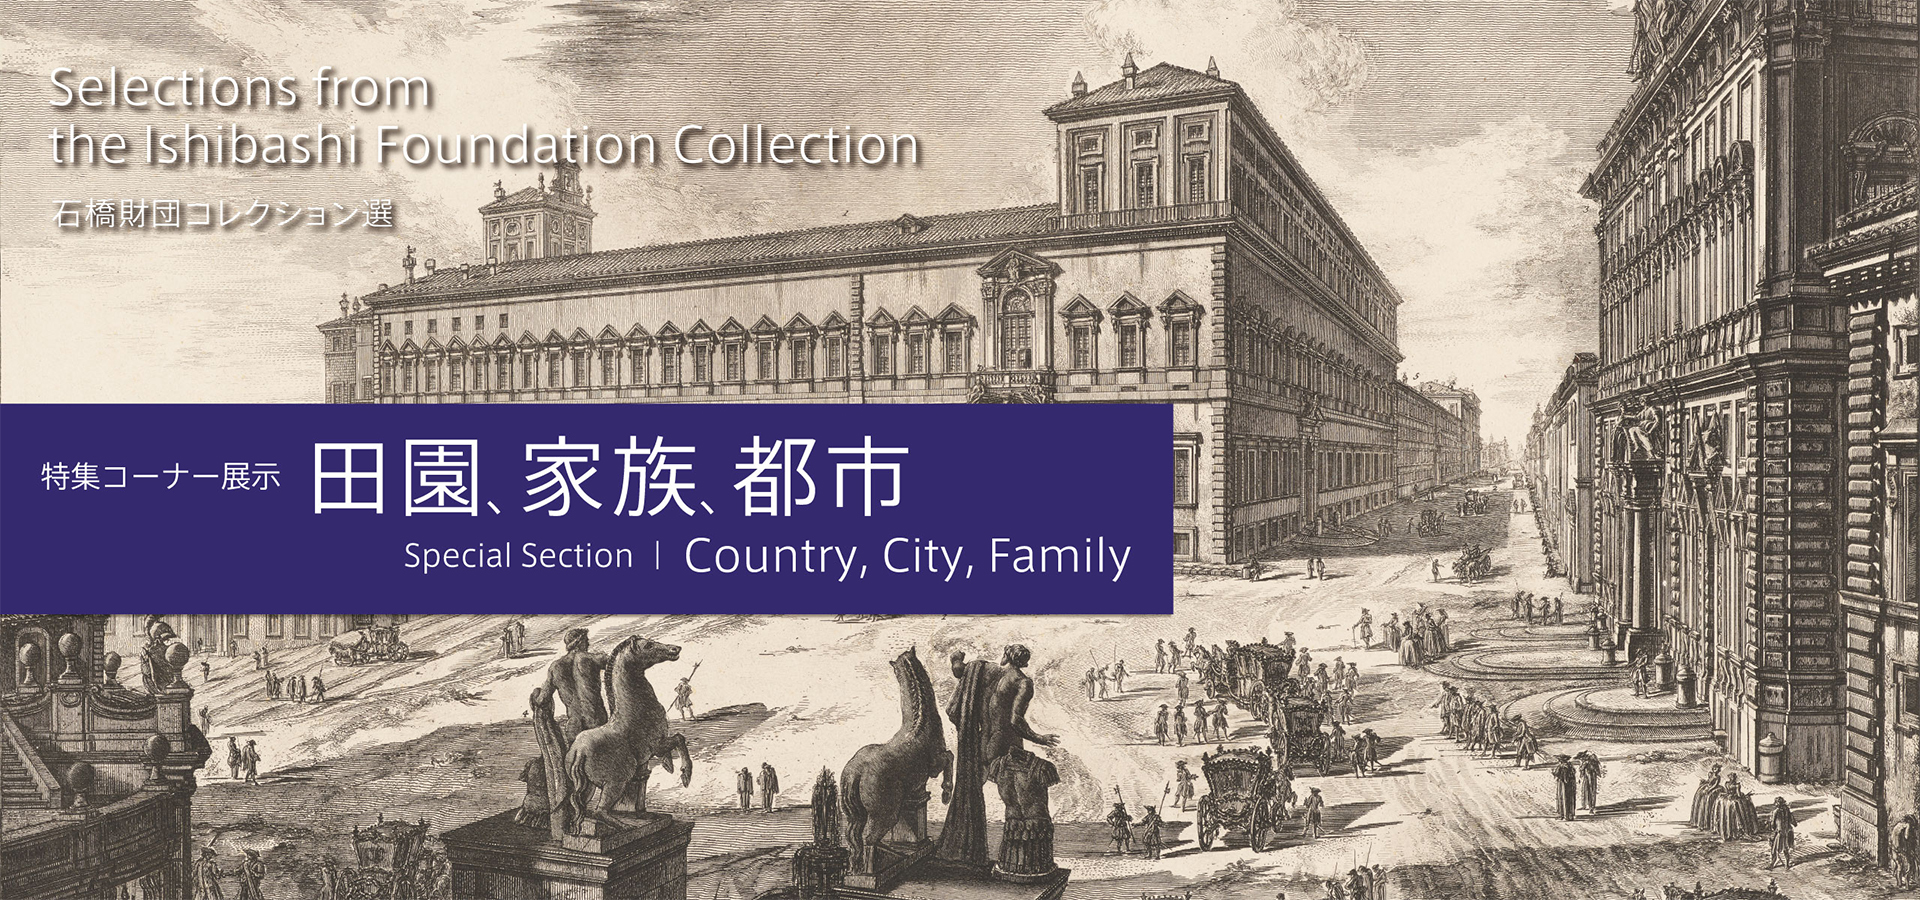 Selections from the Ishibashi Foundation Collection　Special Section　Country, City, Family